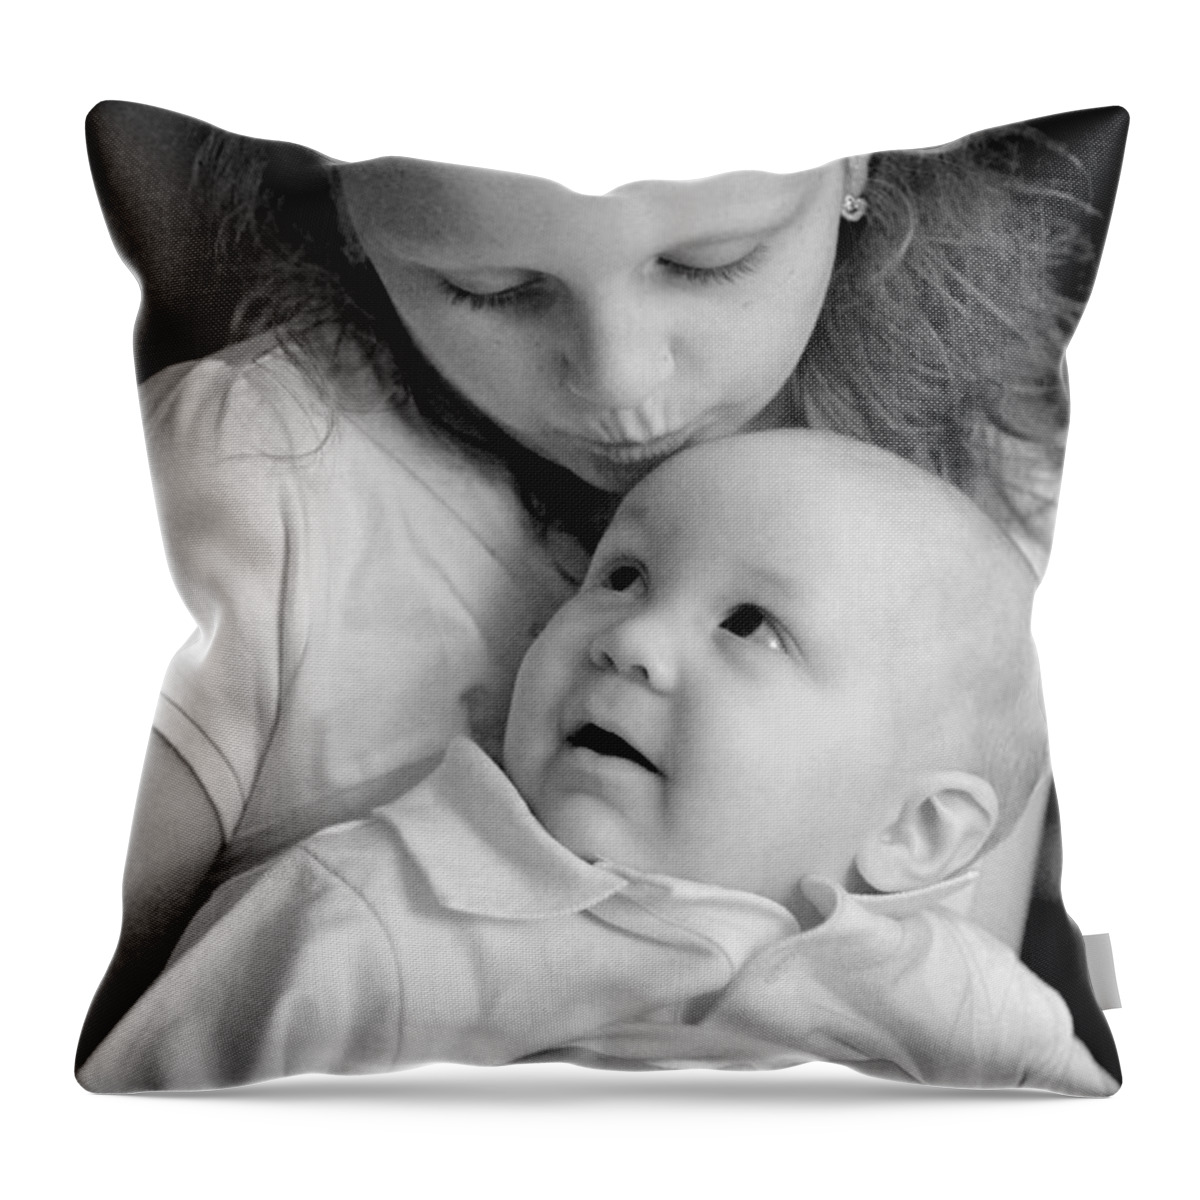 Portraits Throw Pillow featuring the photograph Sibling Love by Lisa Phillips